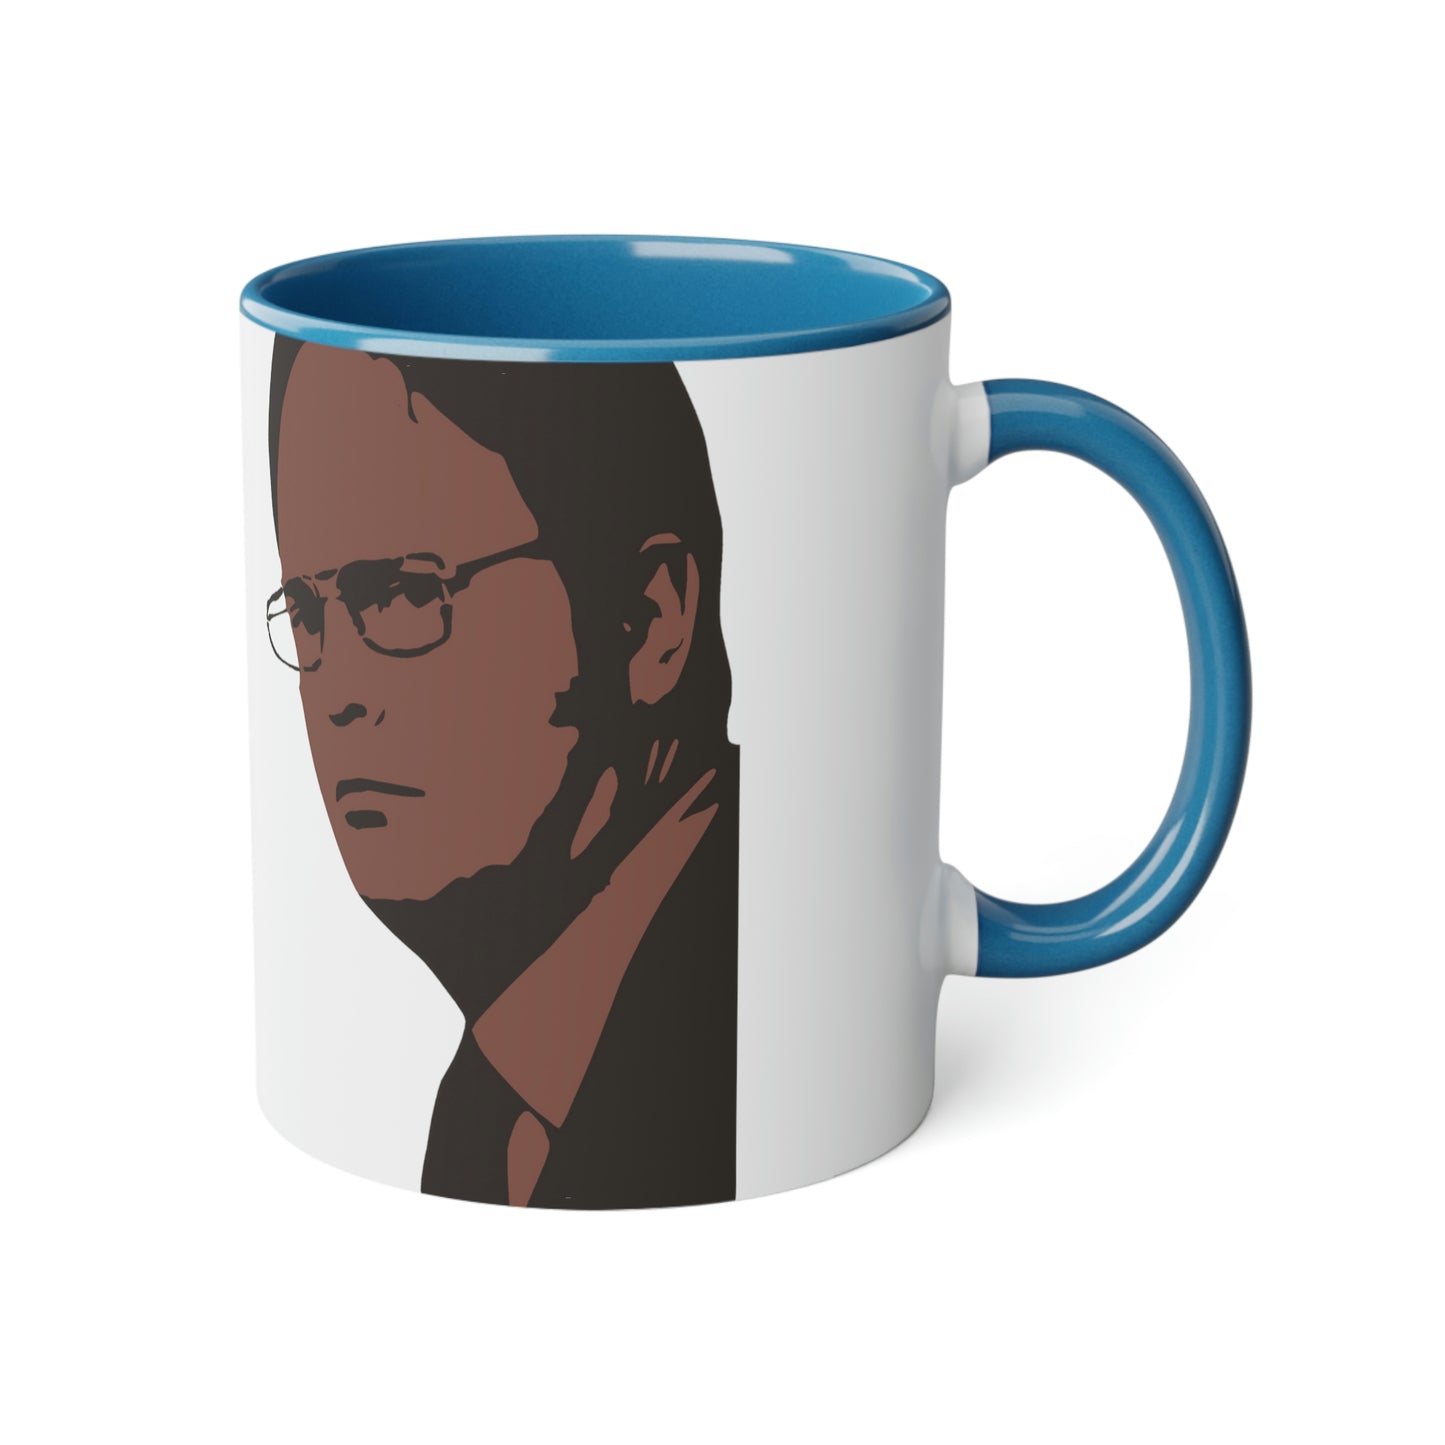 Meme Mug Dunder Mifflin workplace comedy - Whenever I'm about to do something, I think, 'Would an idiot do that?